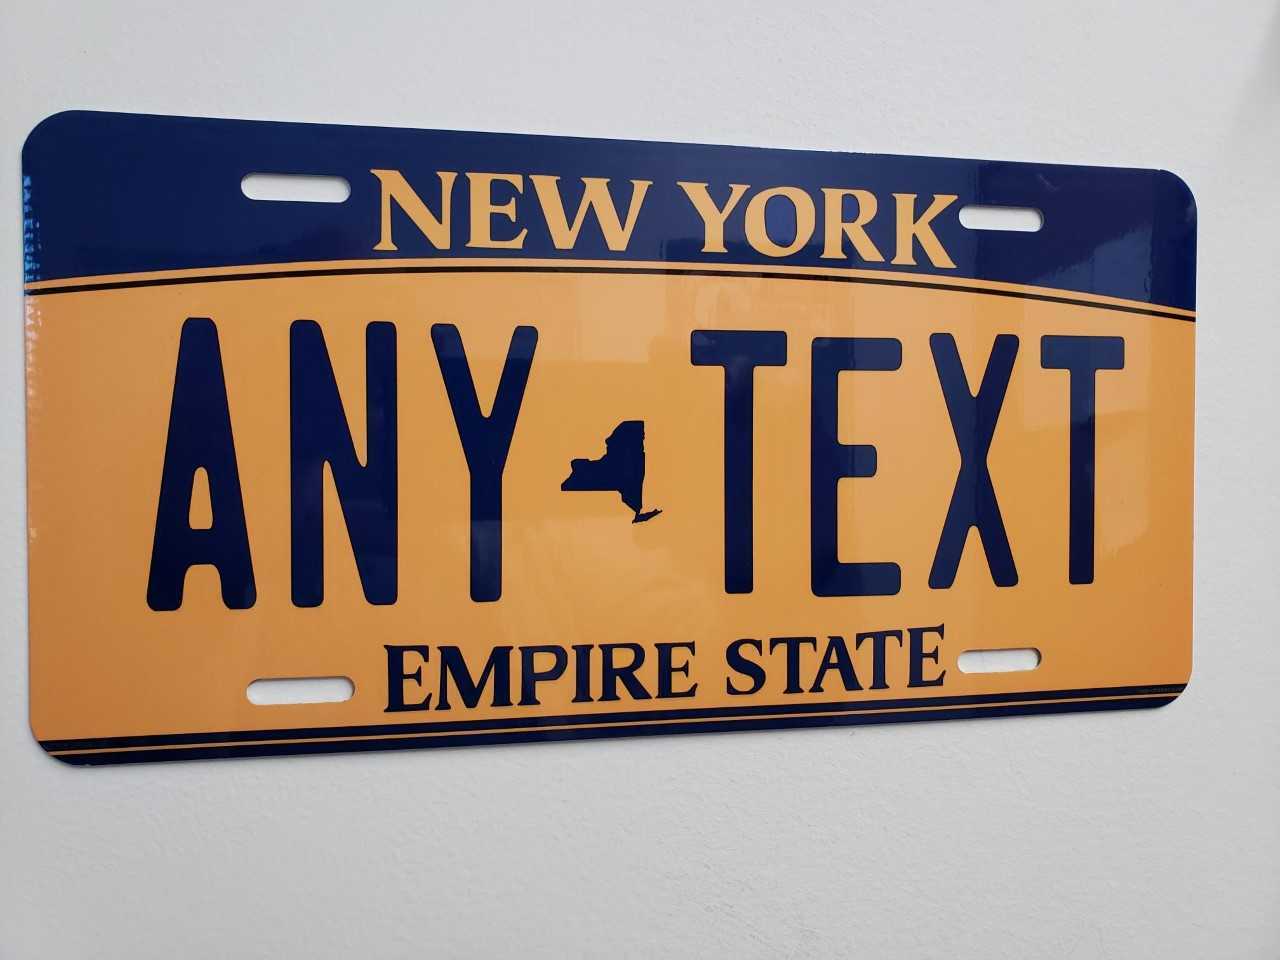 CUSTOMIZE THIS NEW YORK LICENSE PLATE - ANY TEXT YOU WANT, novelty AUTO plate